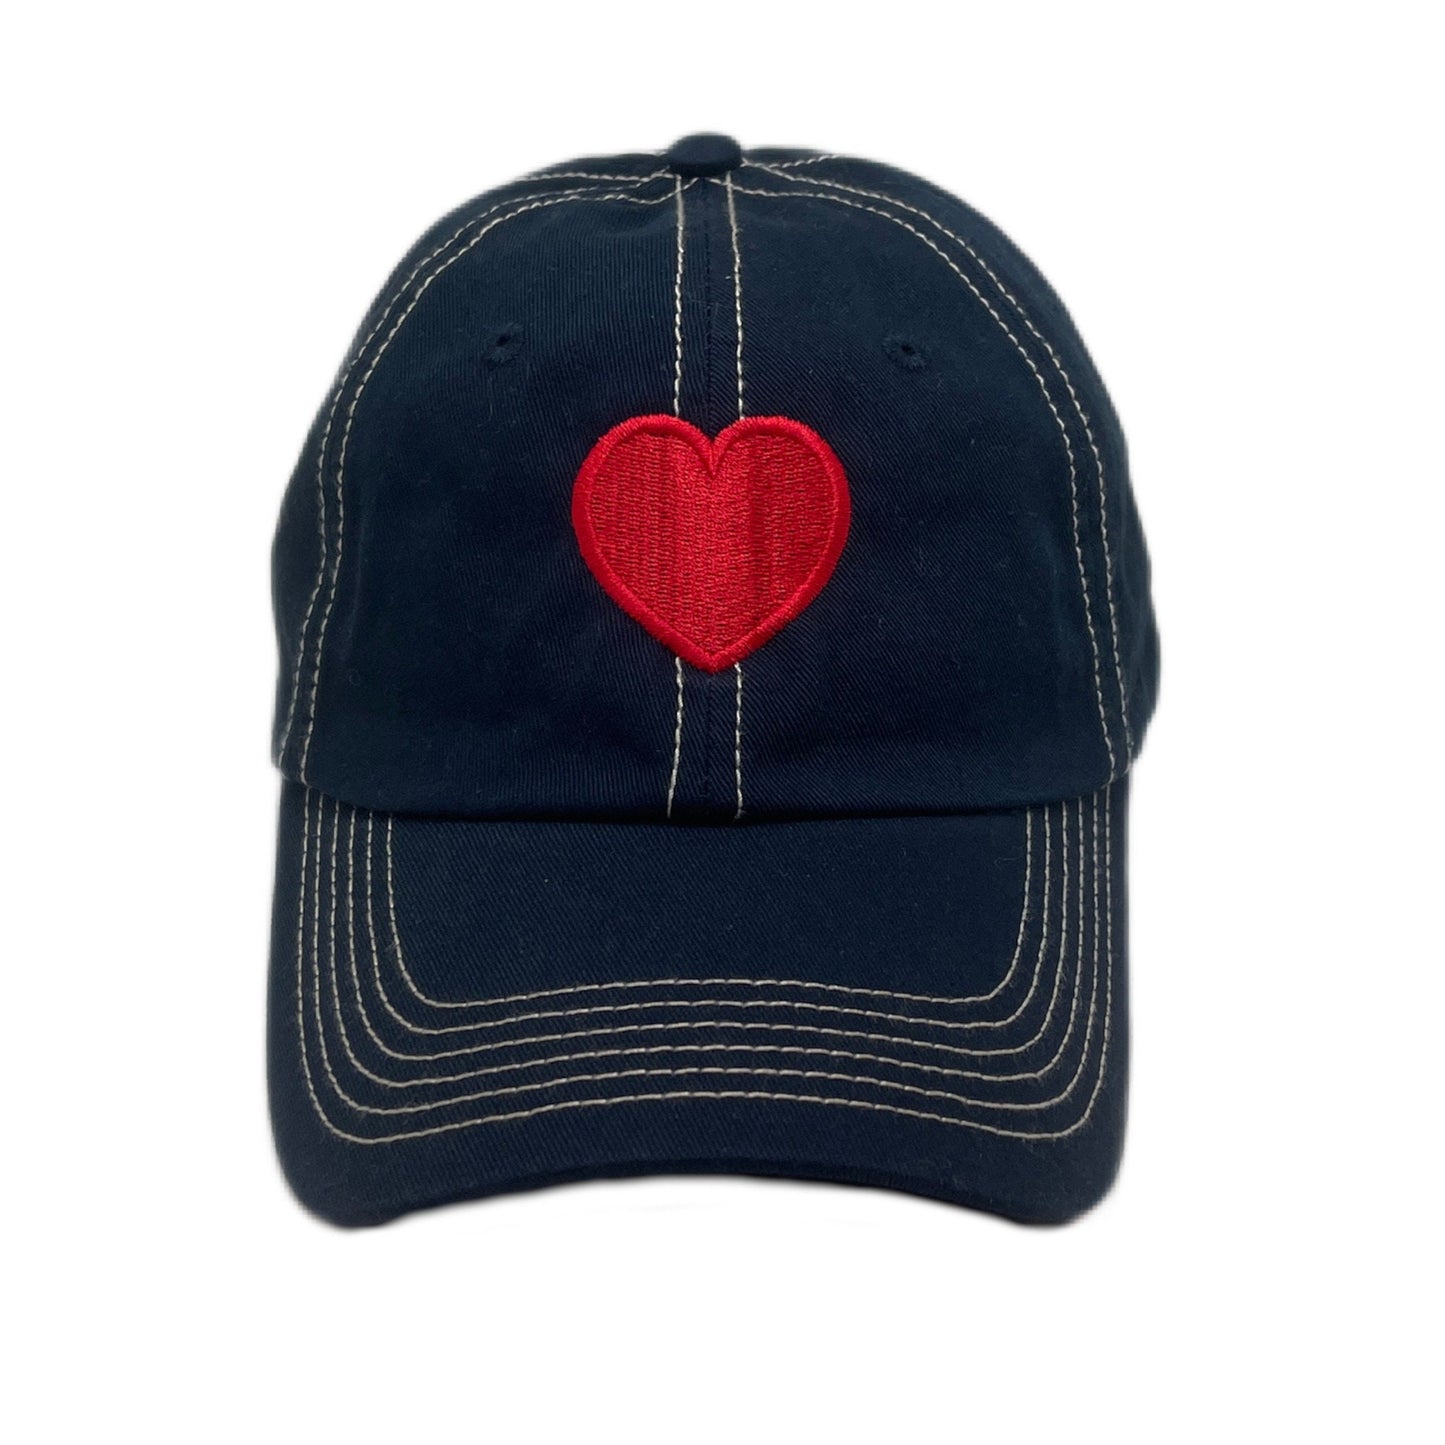 Red Heart Dad Hat | Classic Embroidered Baseball Cap | Adjustable | Valentine's Day